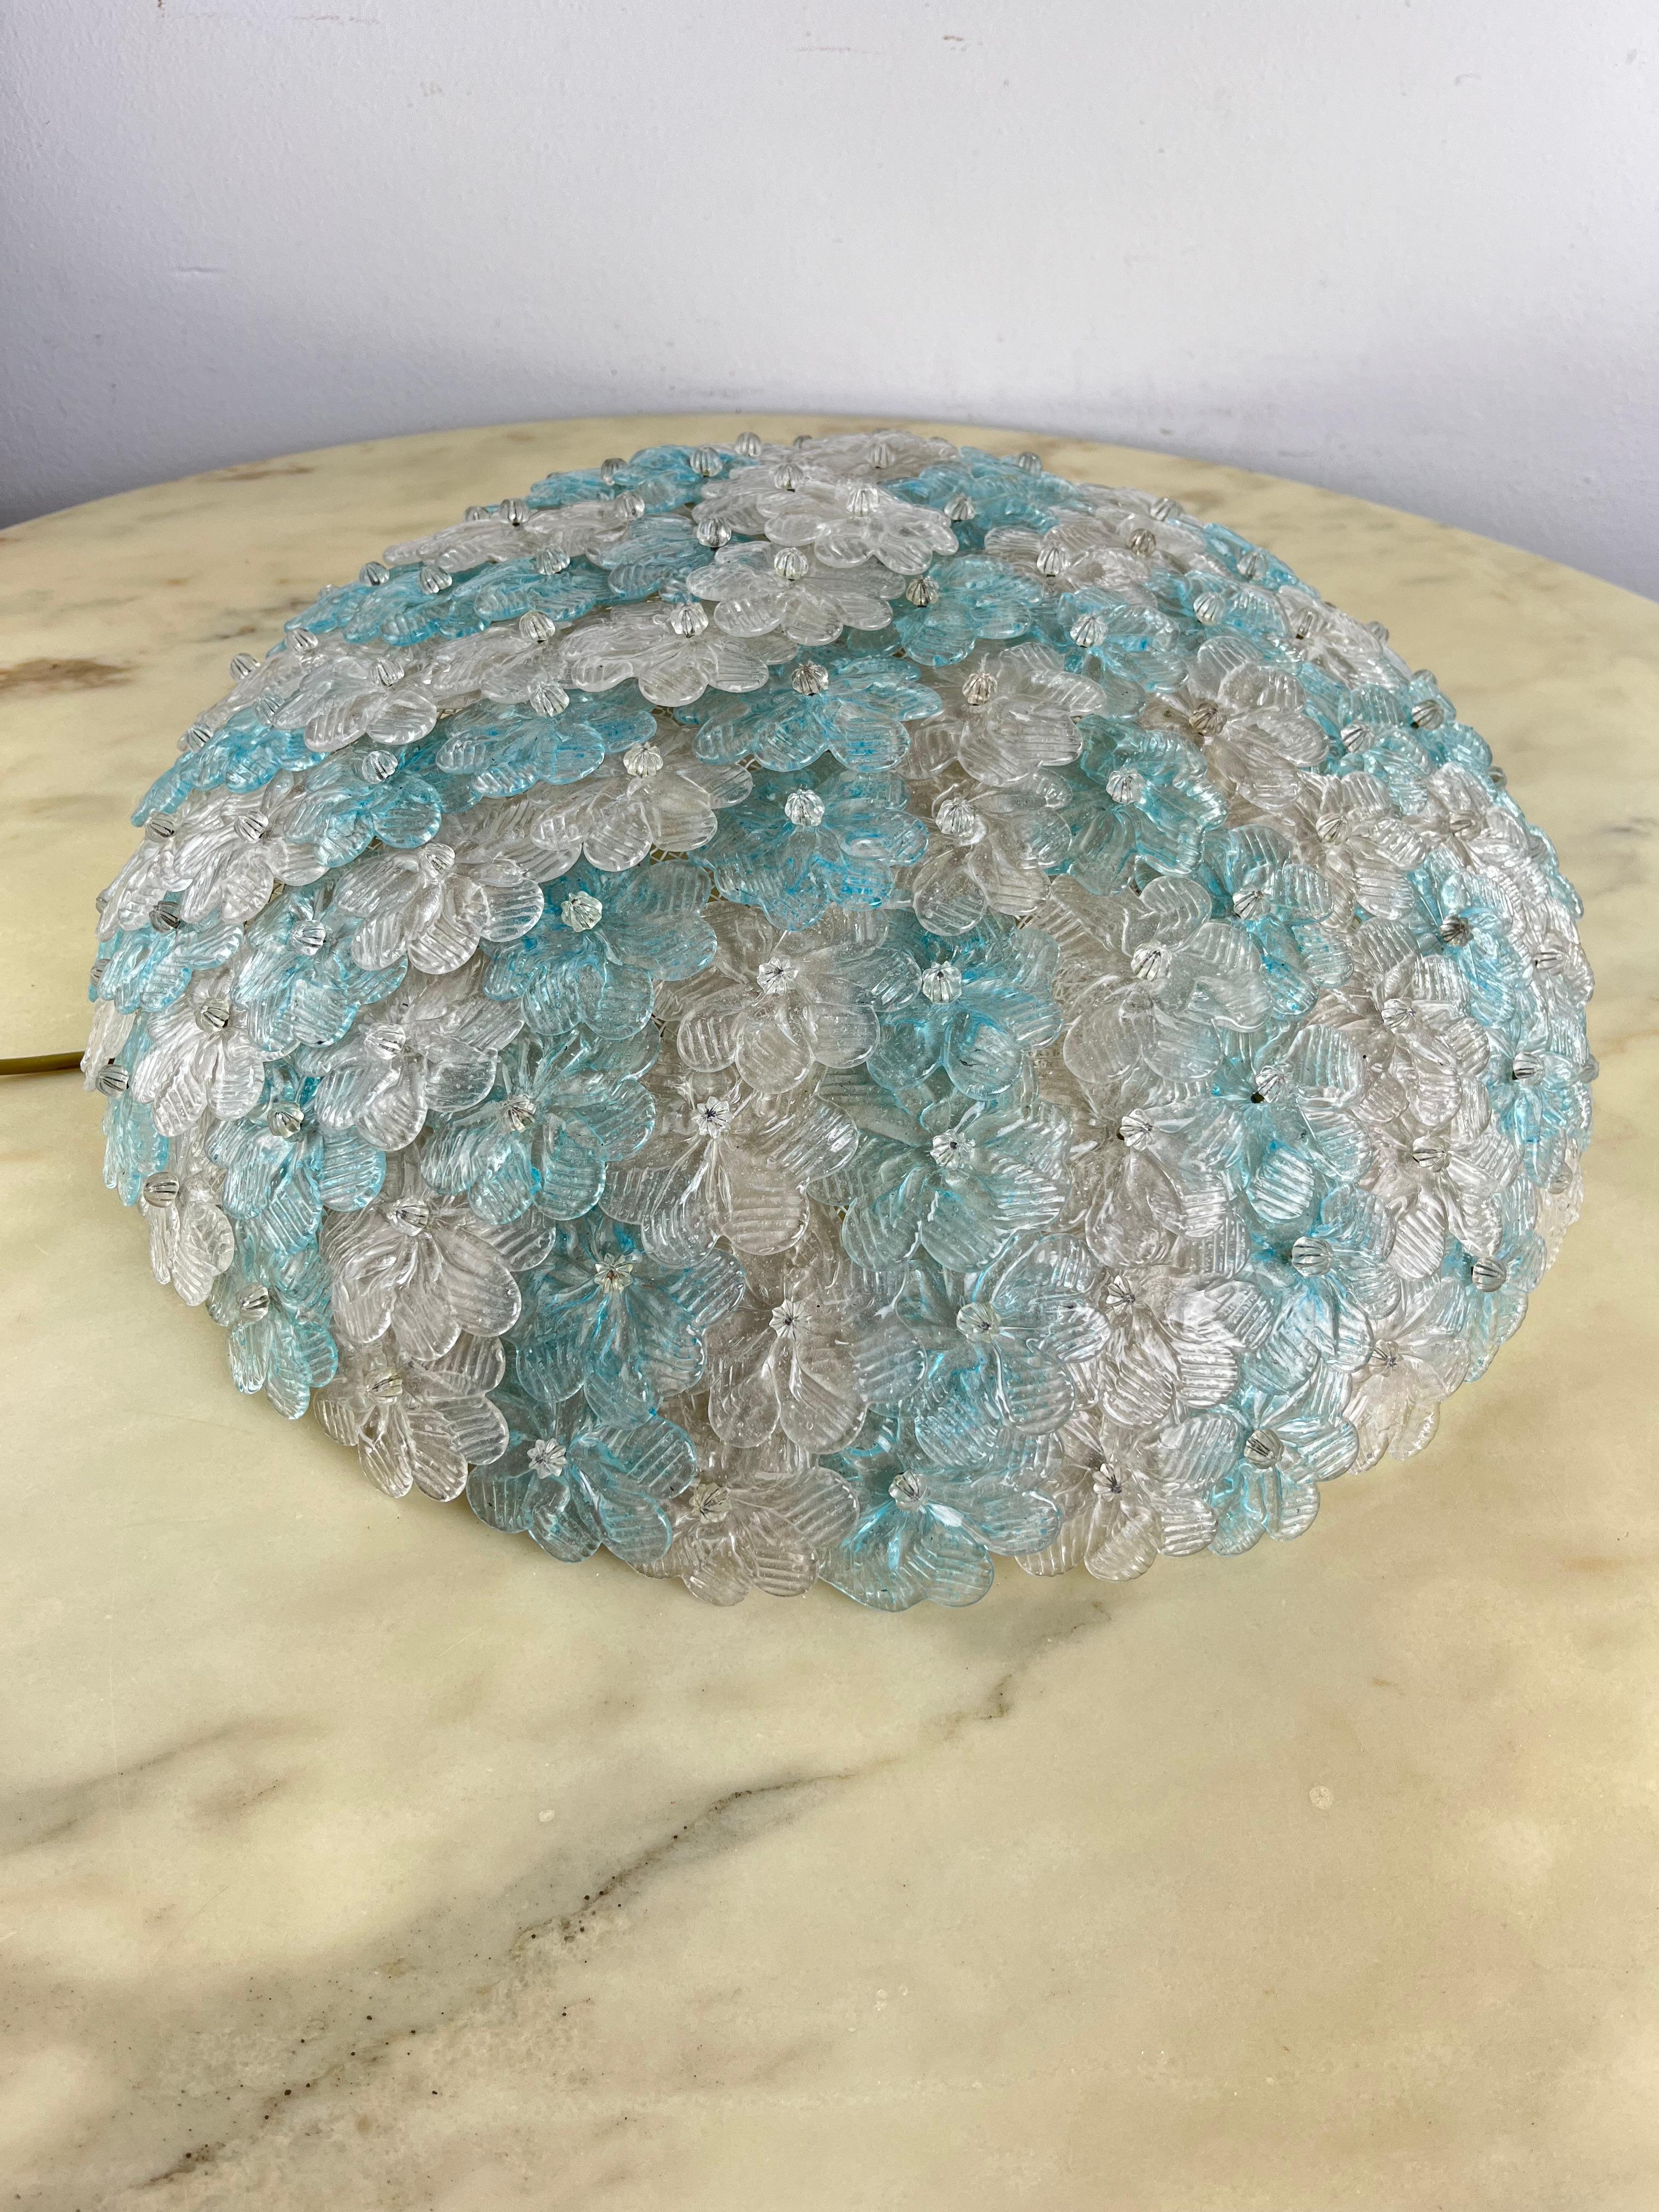 Large Venetian Murano glass ceiling light Mid-Century Barovier & Toso 1950s
Found in a noble apartment, transparent and light blue color.
6 lights, intact and working, e14 lamps. Metal structure, good condition, small signs of aging.

We guarantee